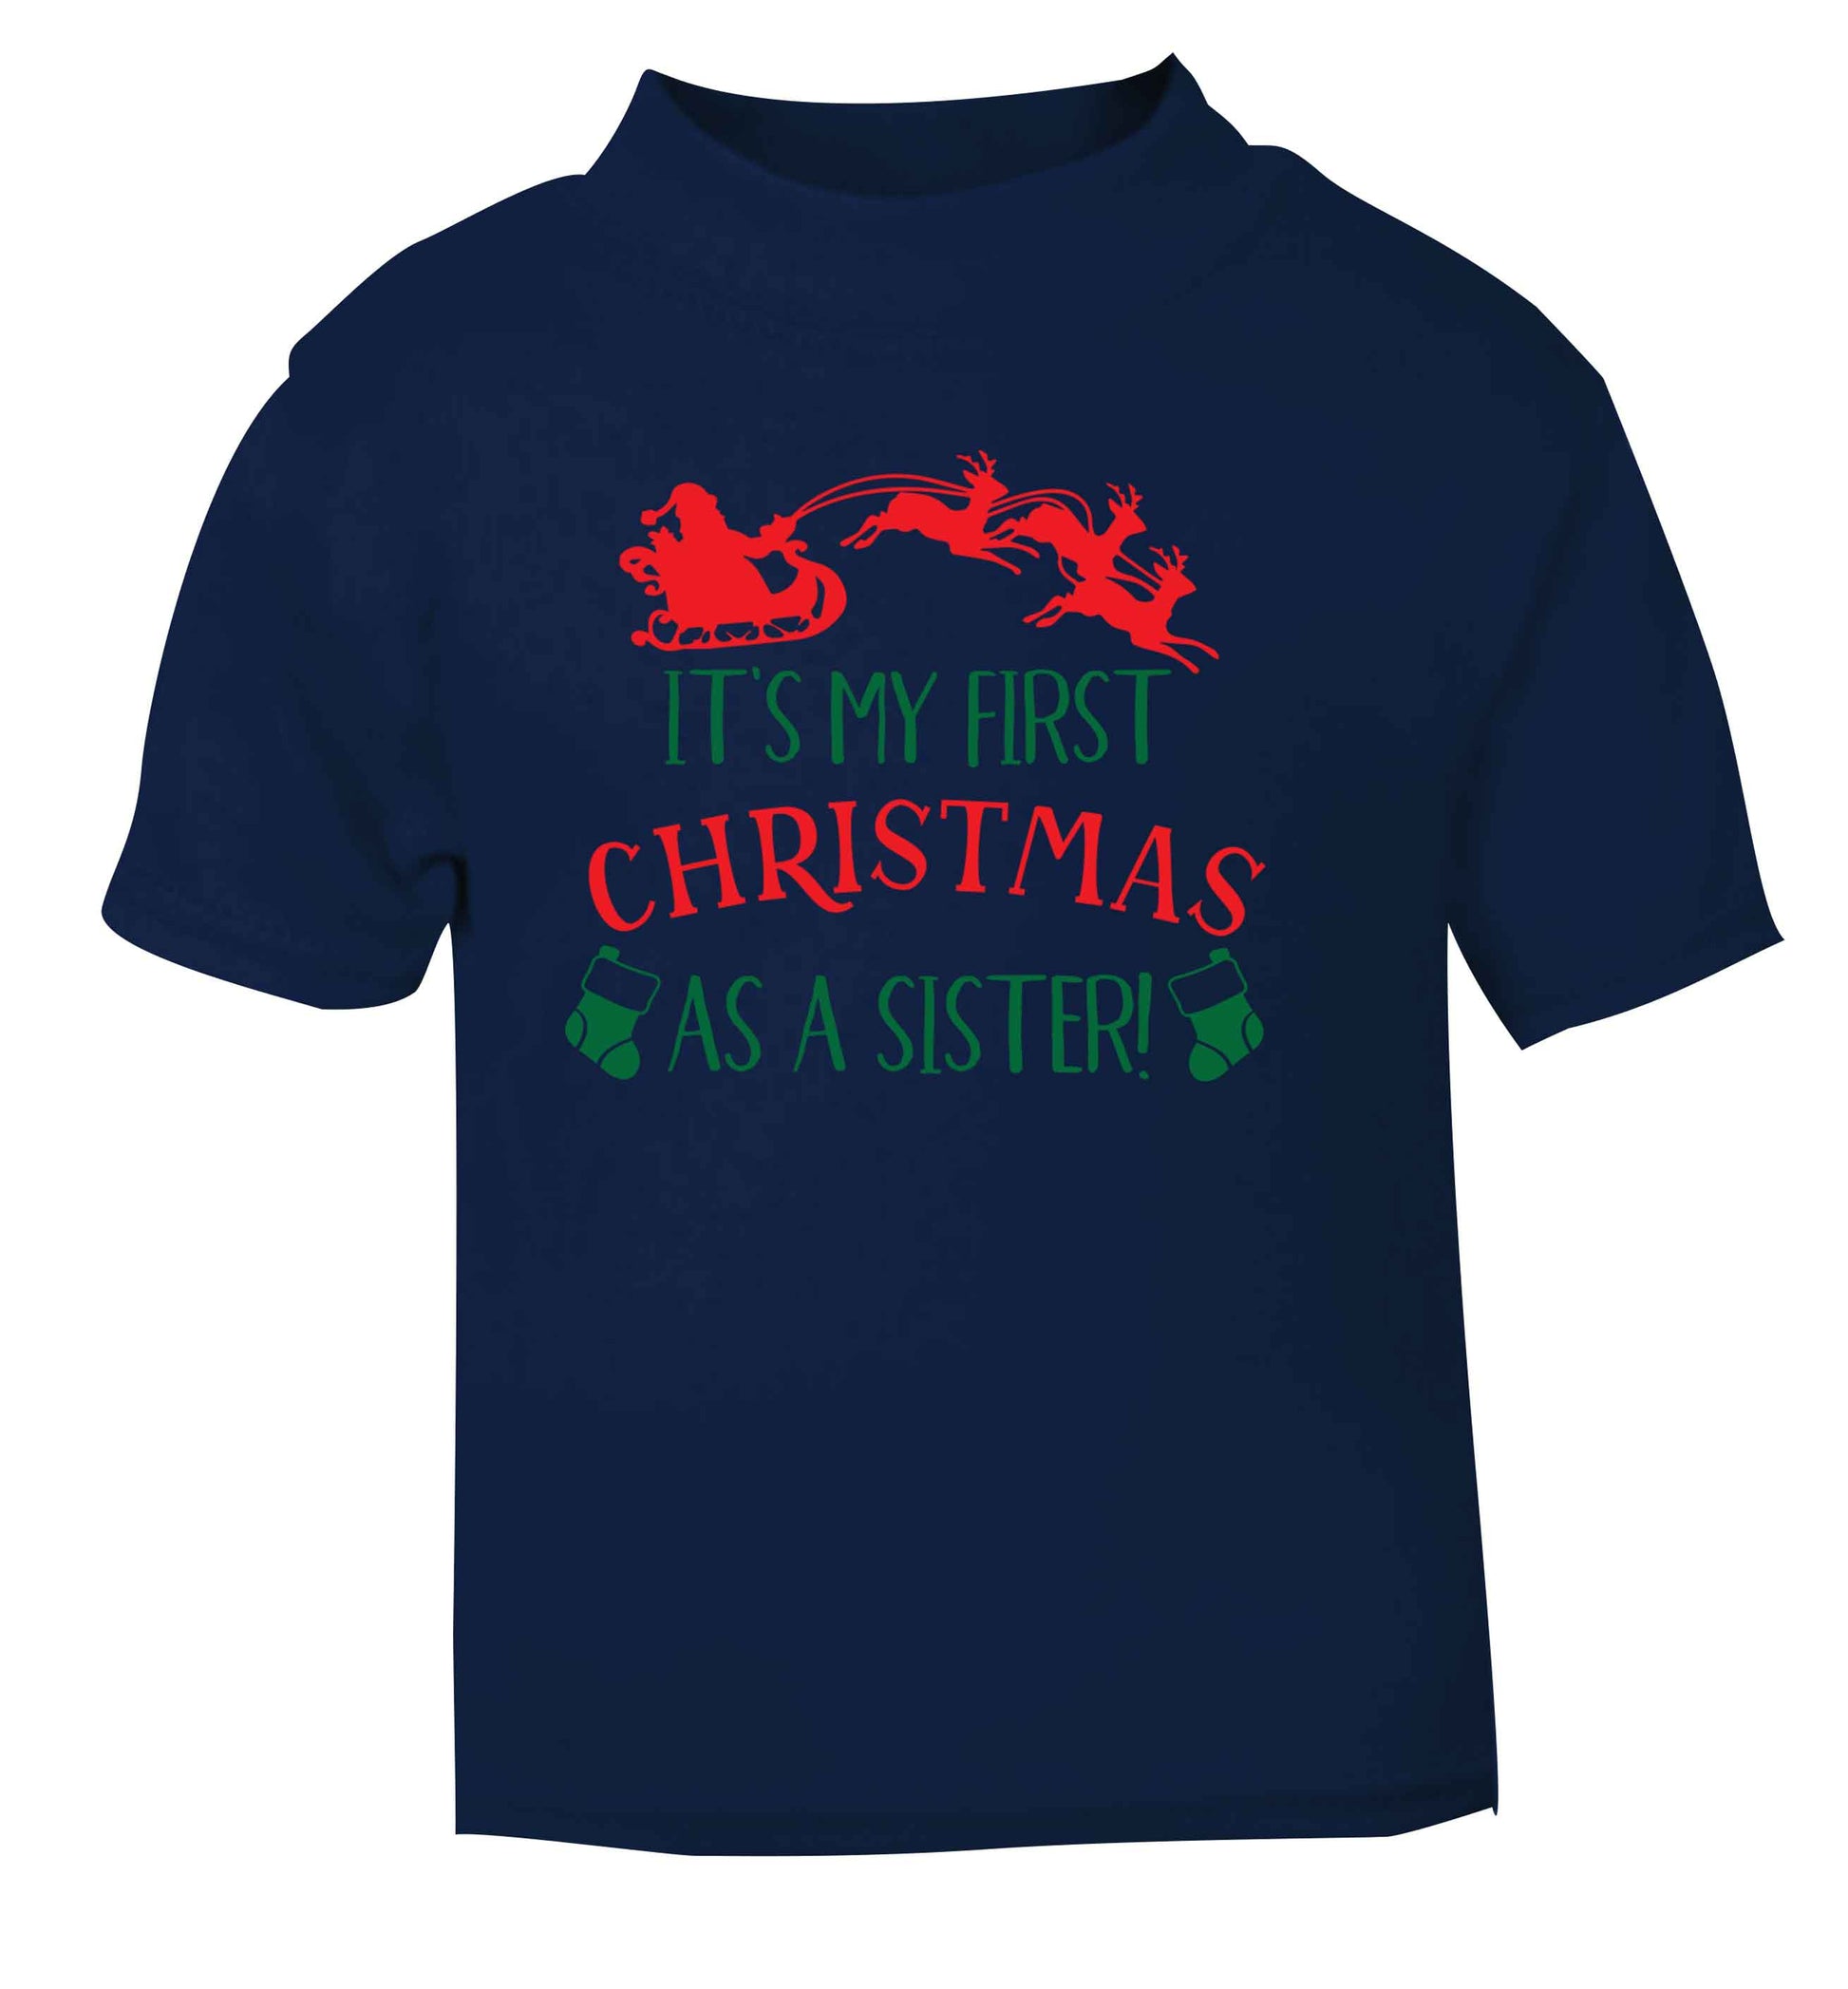 It's my first Christmas as a sister! navy Baby Toddler Tshirt 2 Years